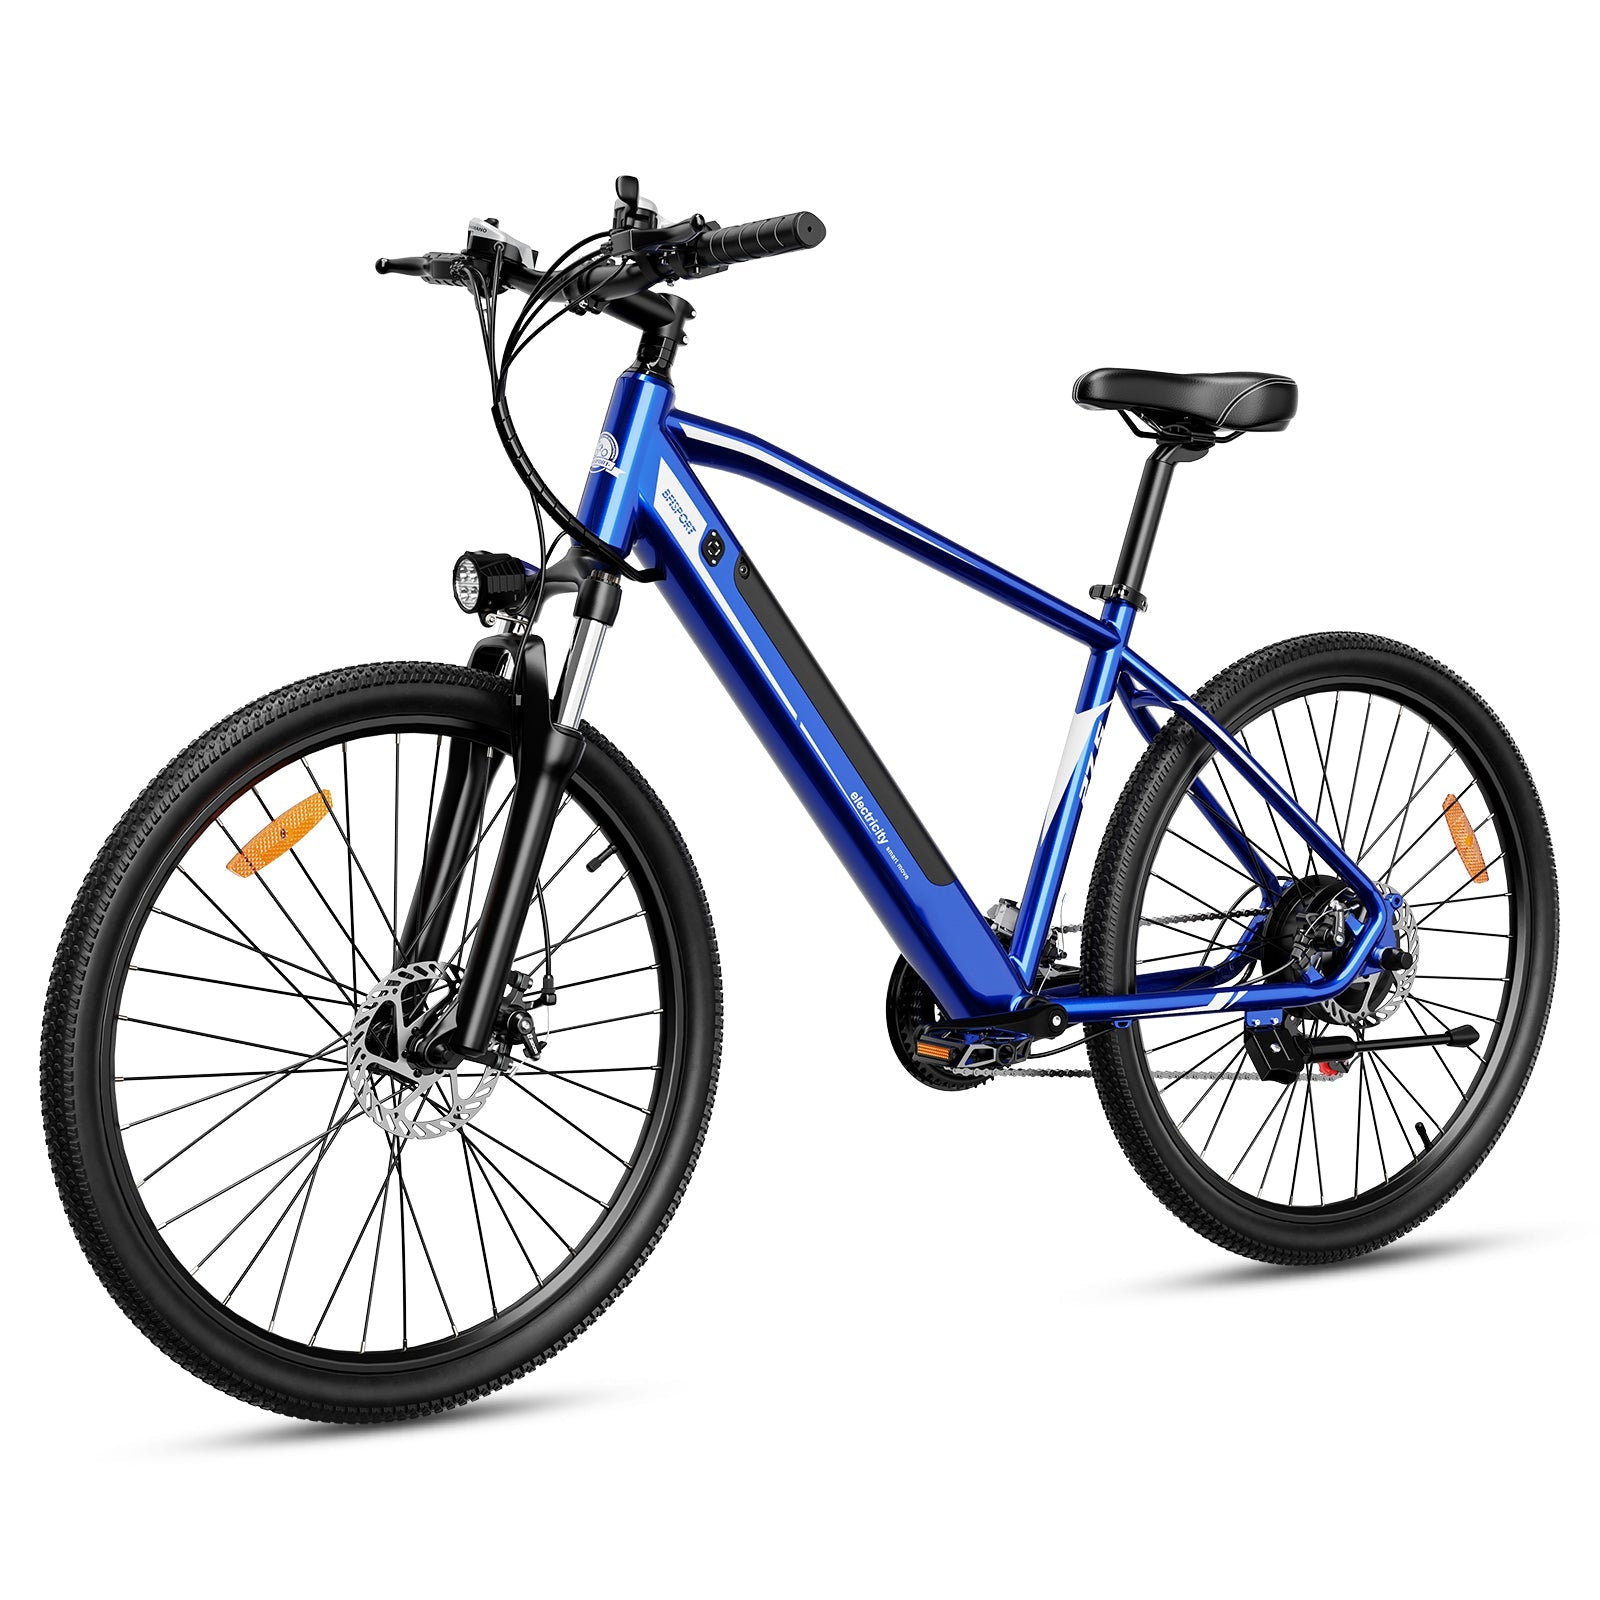 EB27 Iwheels Electric Bike with 750W Motor and 27inch Normal Tires